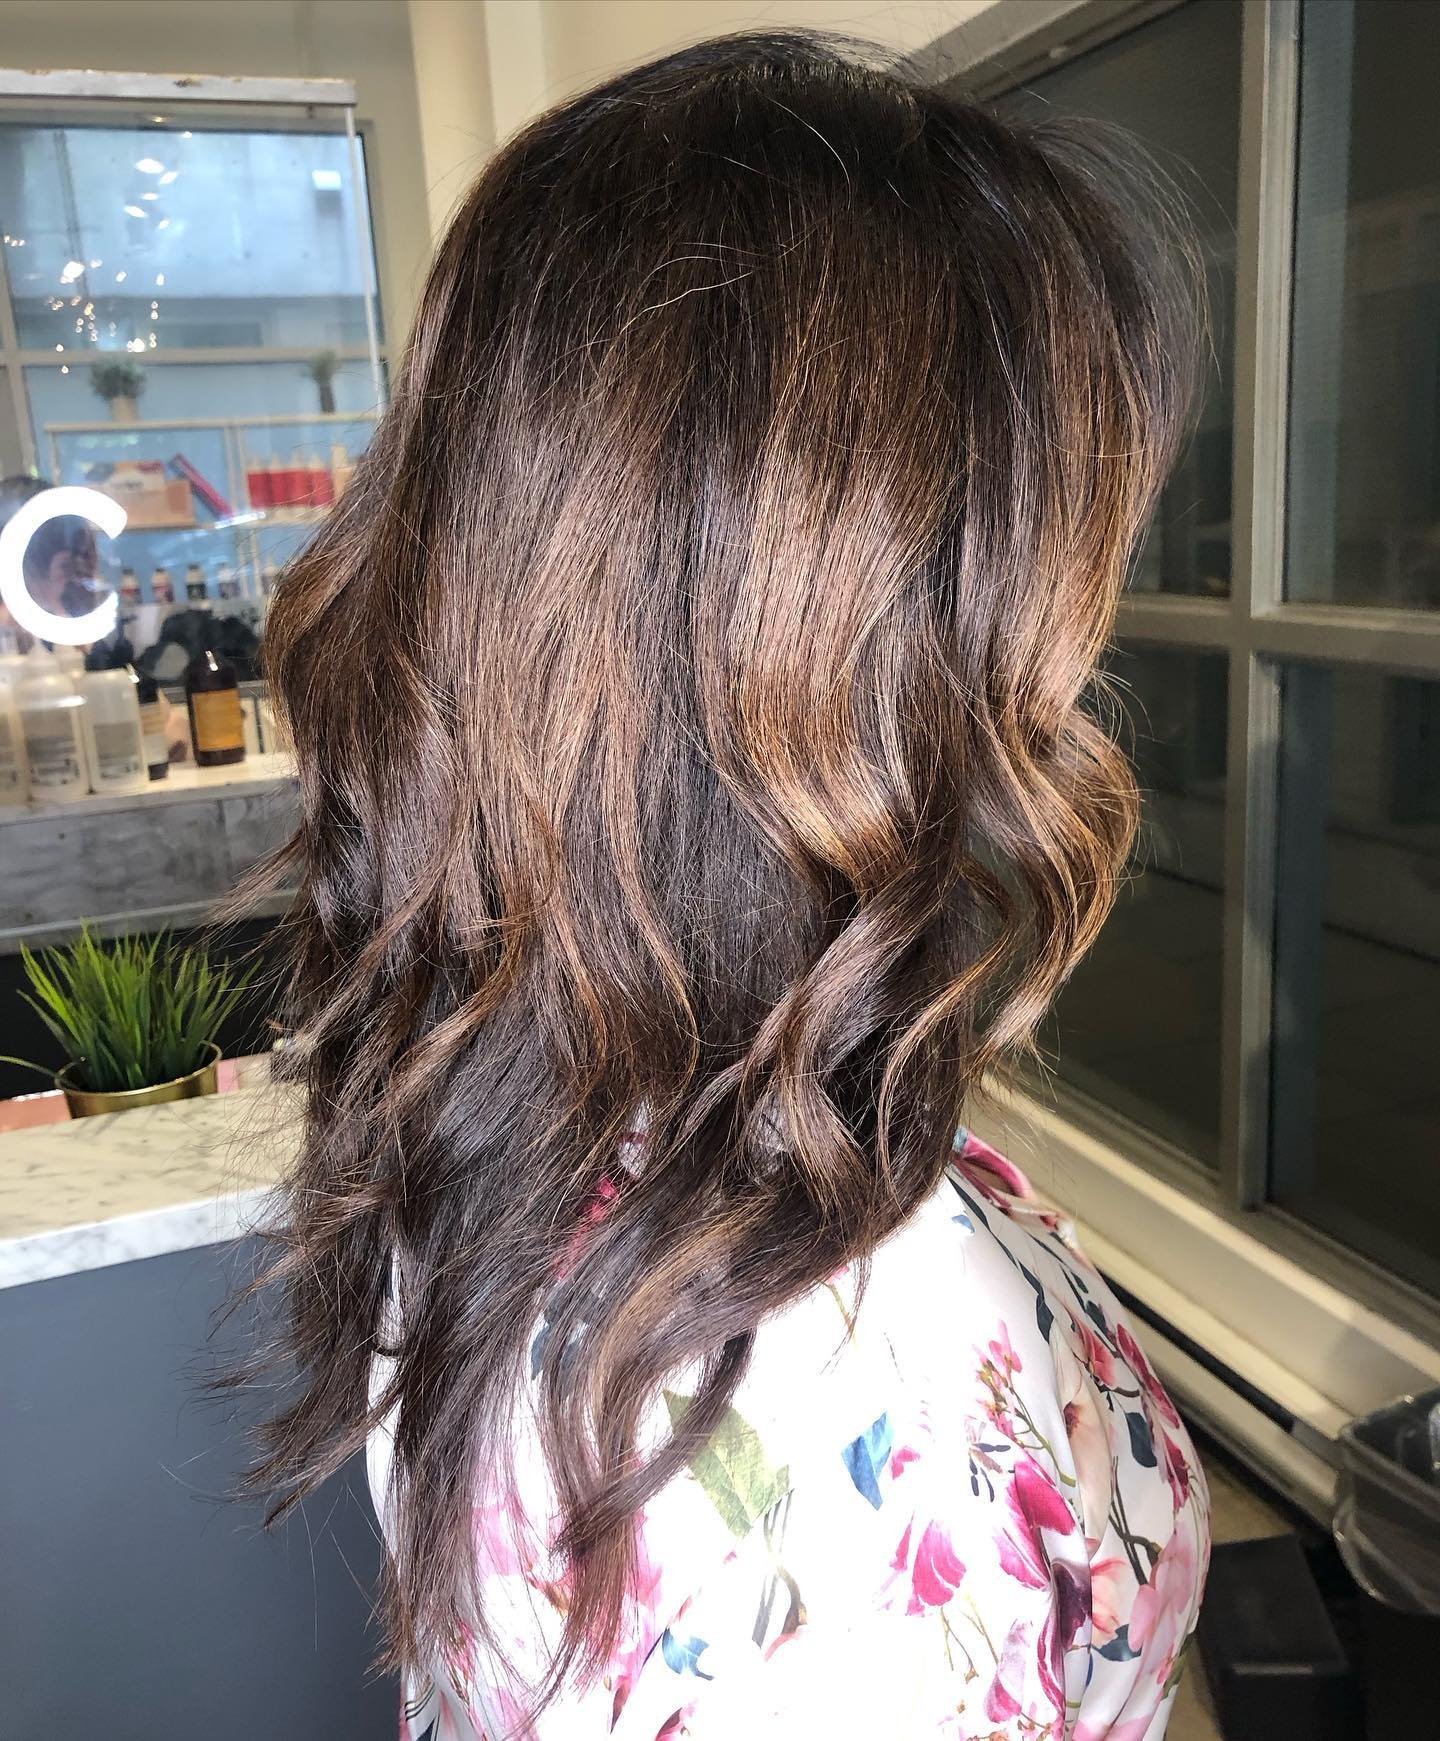 Nothing like fresh new growth colour &amp; a cut @ alixarthurdesign.com. Oil-based &amp; ammonia-free colour for all that shine as well as a happy scalp. Booking &amp; blog links in bio.
&bull;
&bull;
&bull;
#vancouverhairstylist #vancouverhair #vanc